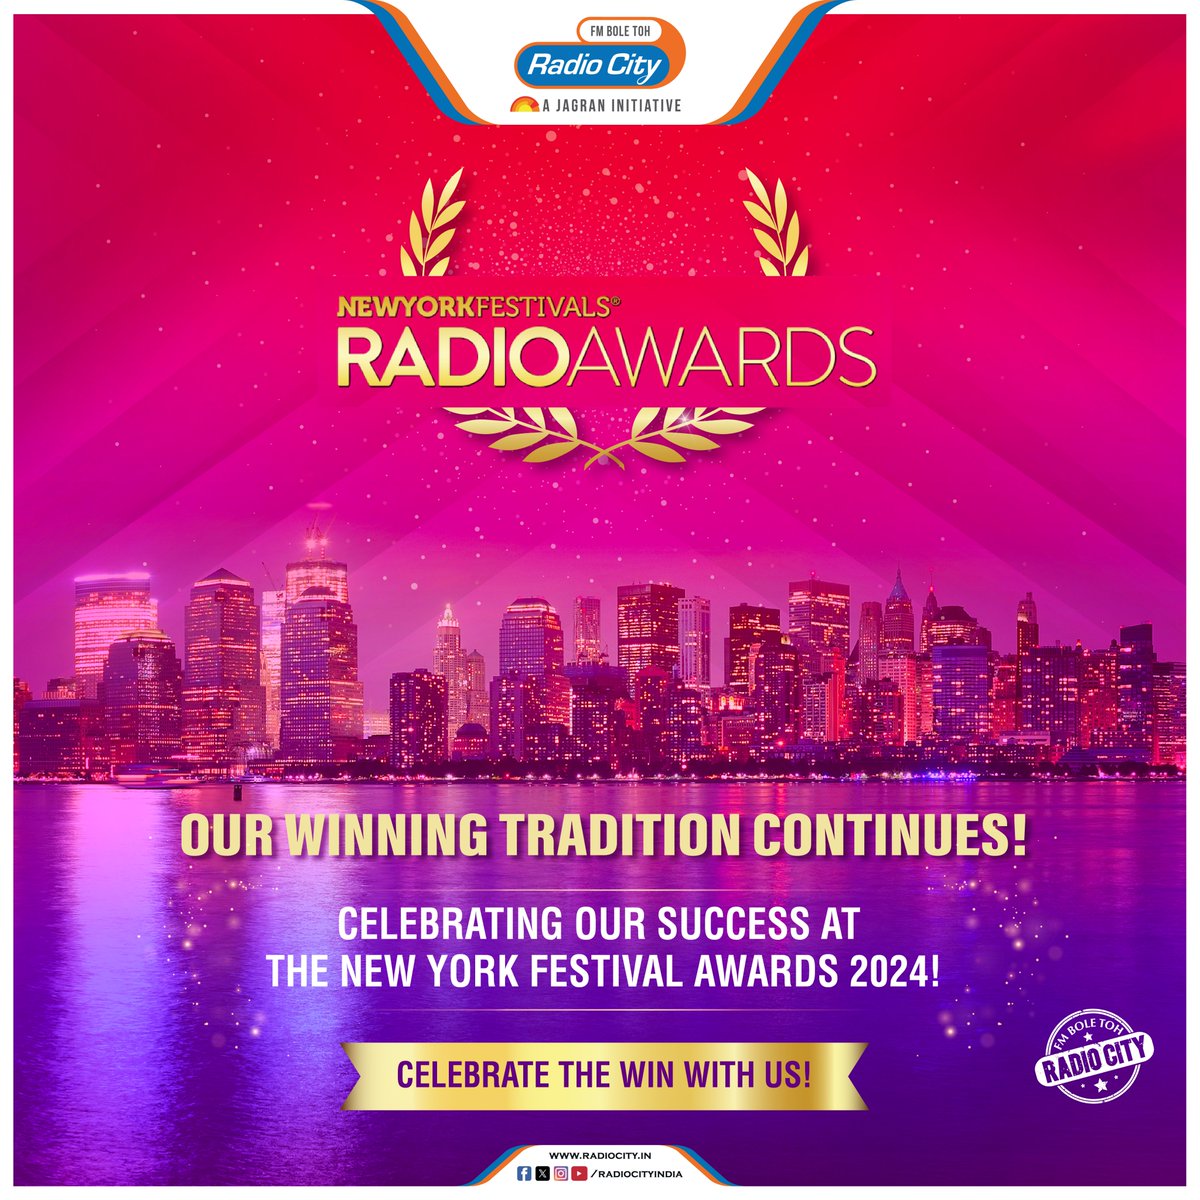 Proud moment for Radio City! We’re thrilled to announce that we’ve clinched yet another set of accolades at the New York Festival Awards 2024, adding to our rich tradition of excellence. Huge thanks to our incredible team! #RadioCity #AwardWinners #NYFA2024 #Excellence